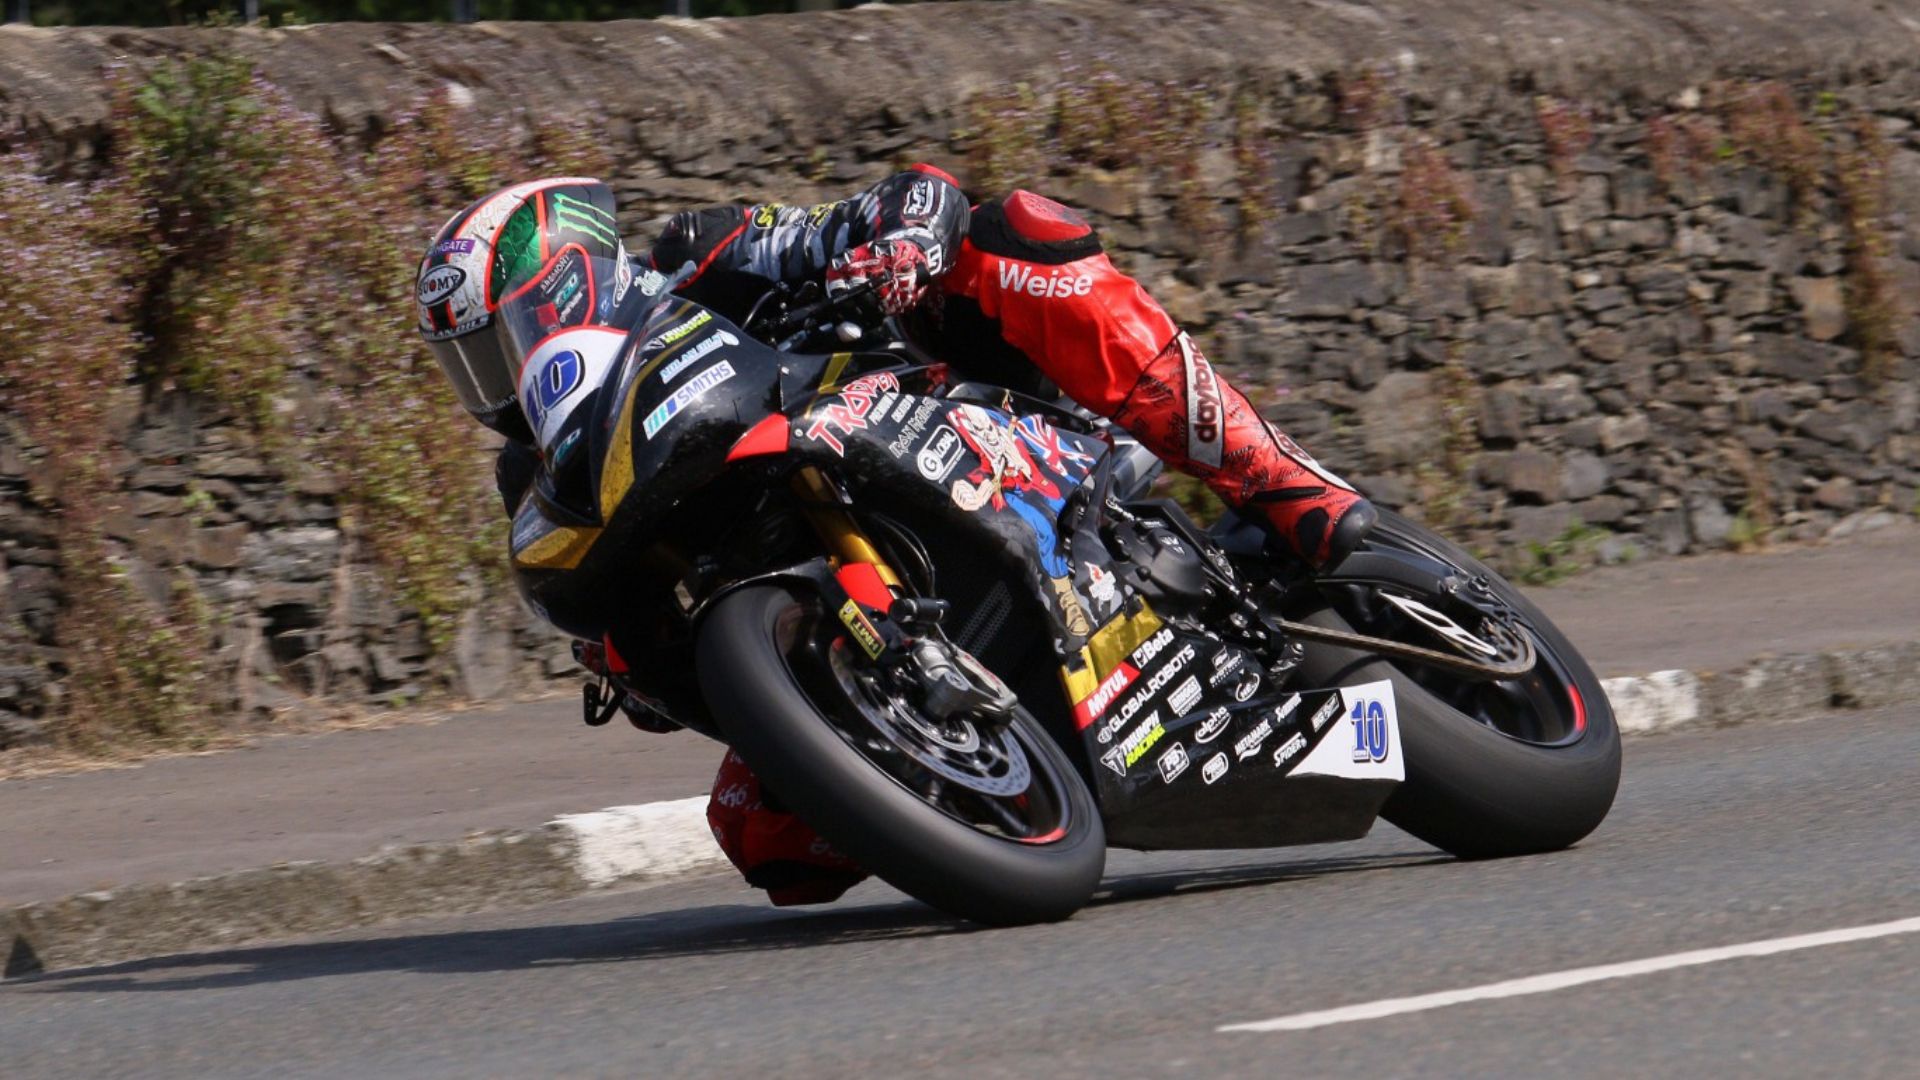 How many deaths have there been during the Isle of Man TT?